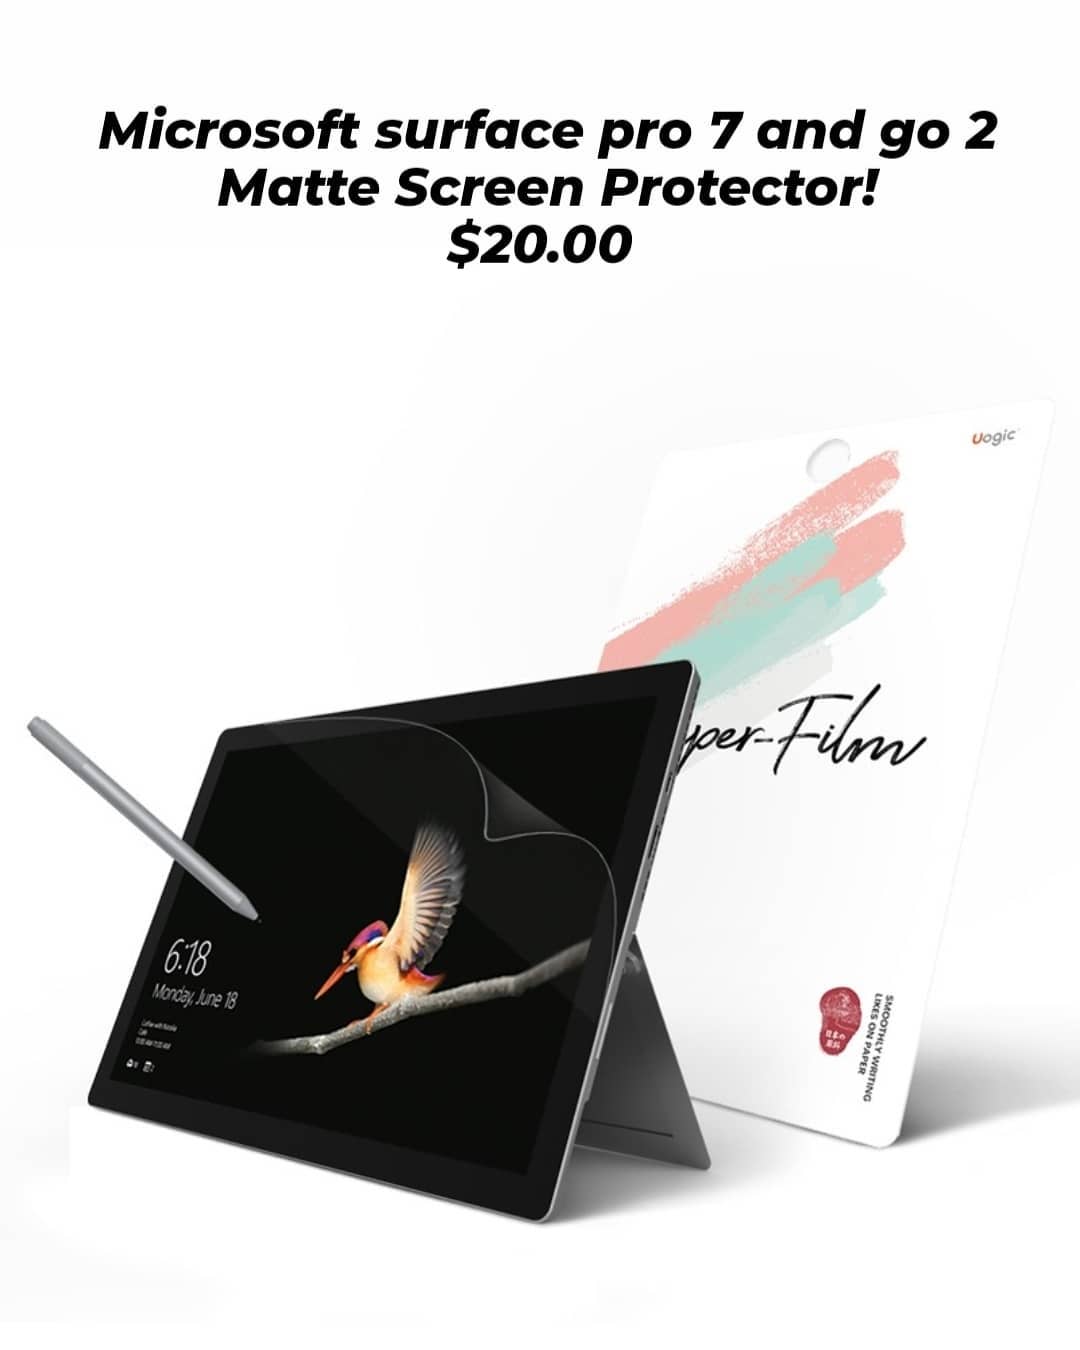 Microsoft Surface Pro 7 and Go 2 Matte Screen Protector